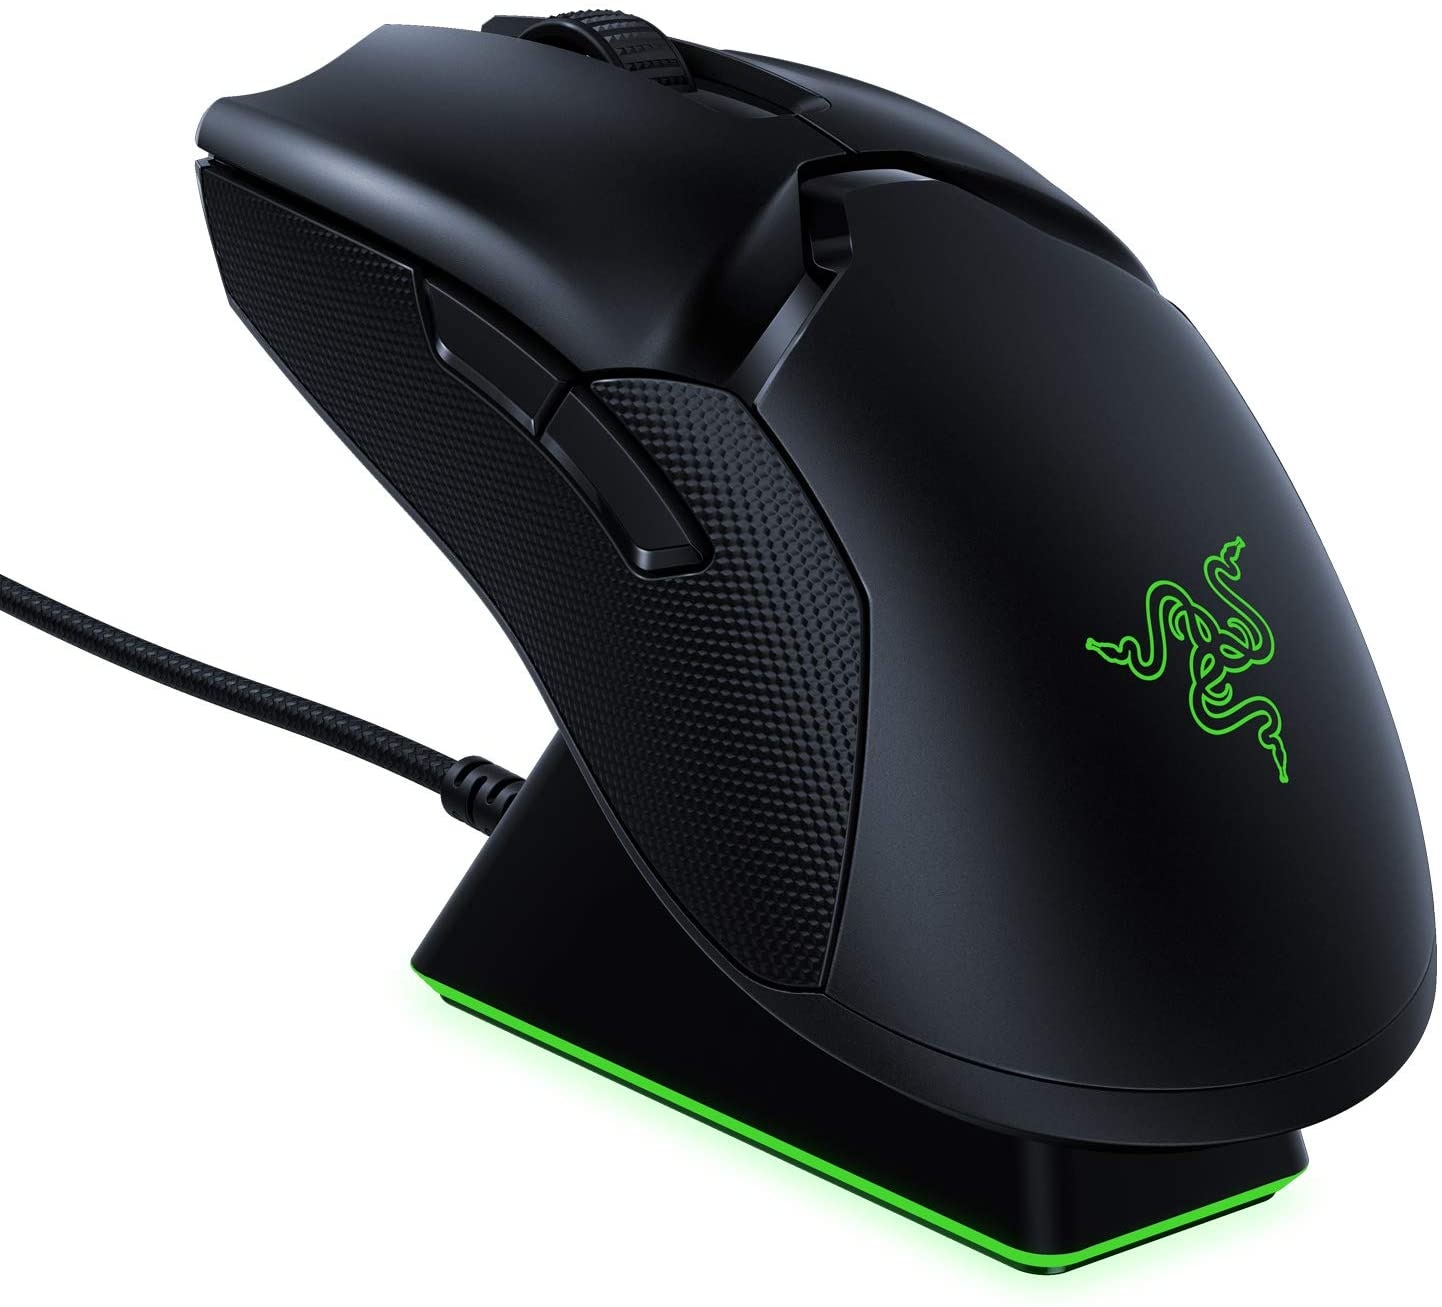 Razer Viper Ultimate Hyperspeed Lightest Wireless Gaming Mouse & RGB Charging Dock BRAND NEW - 1